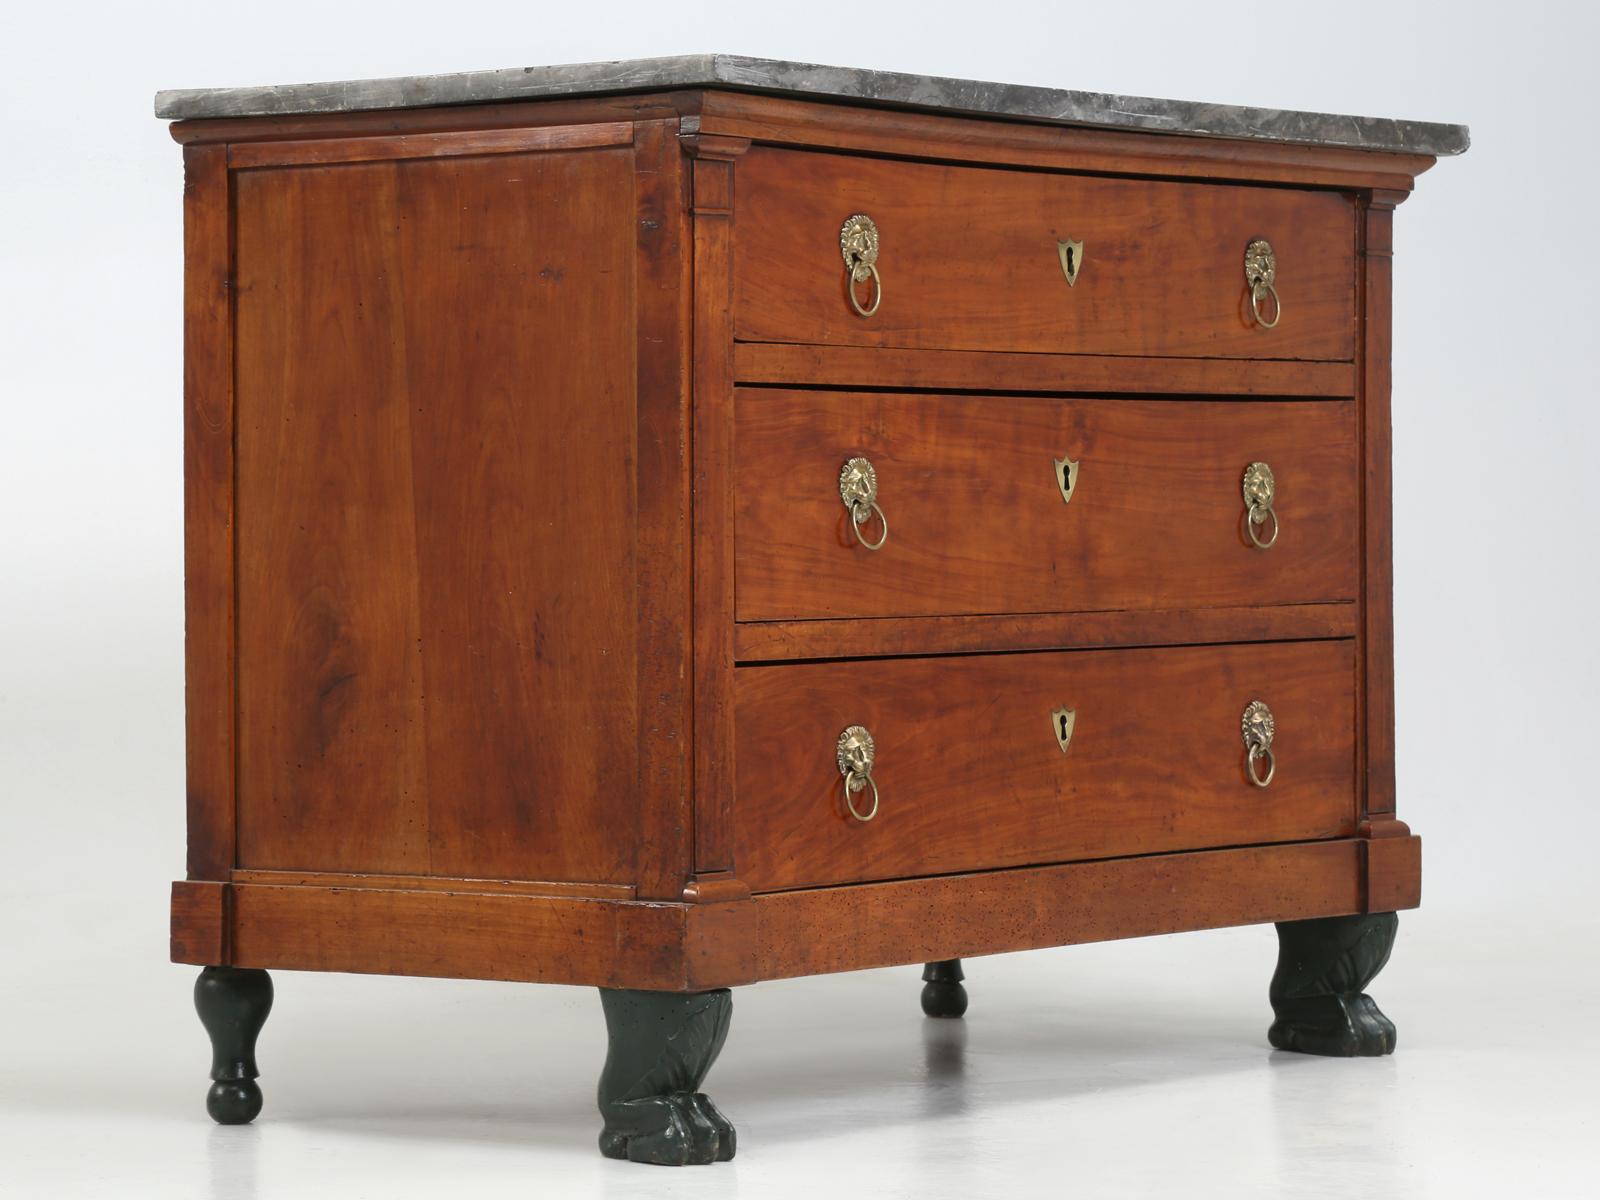 French Antique Empire or Restoration Commode with Lion Paw Feet, Completely Restored